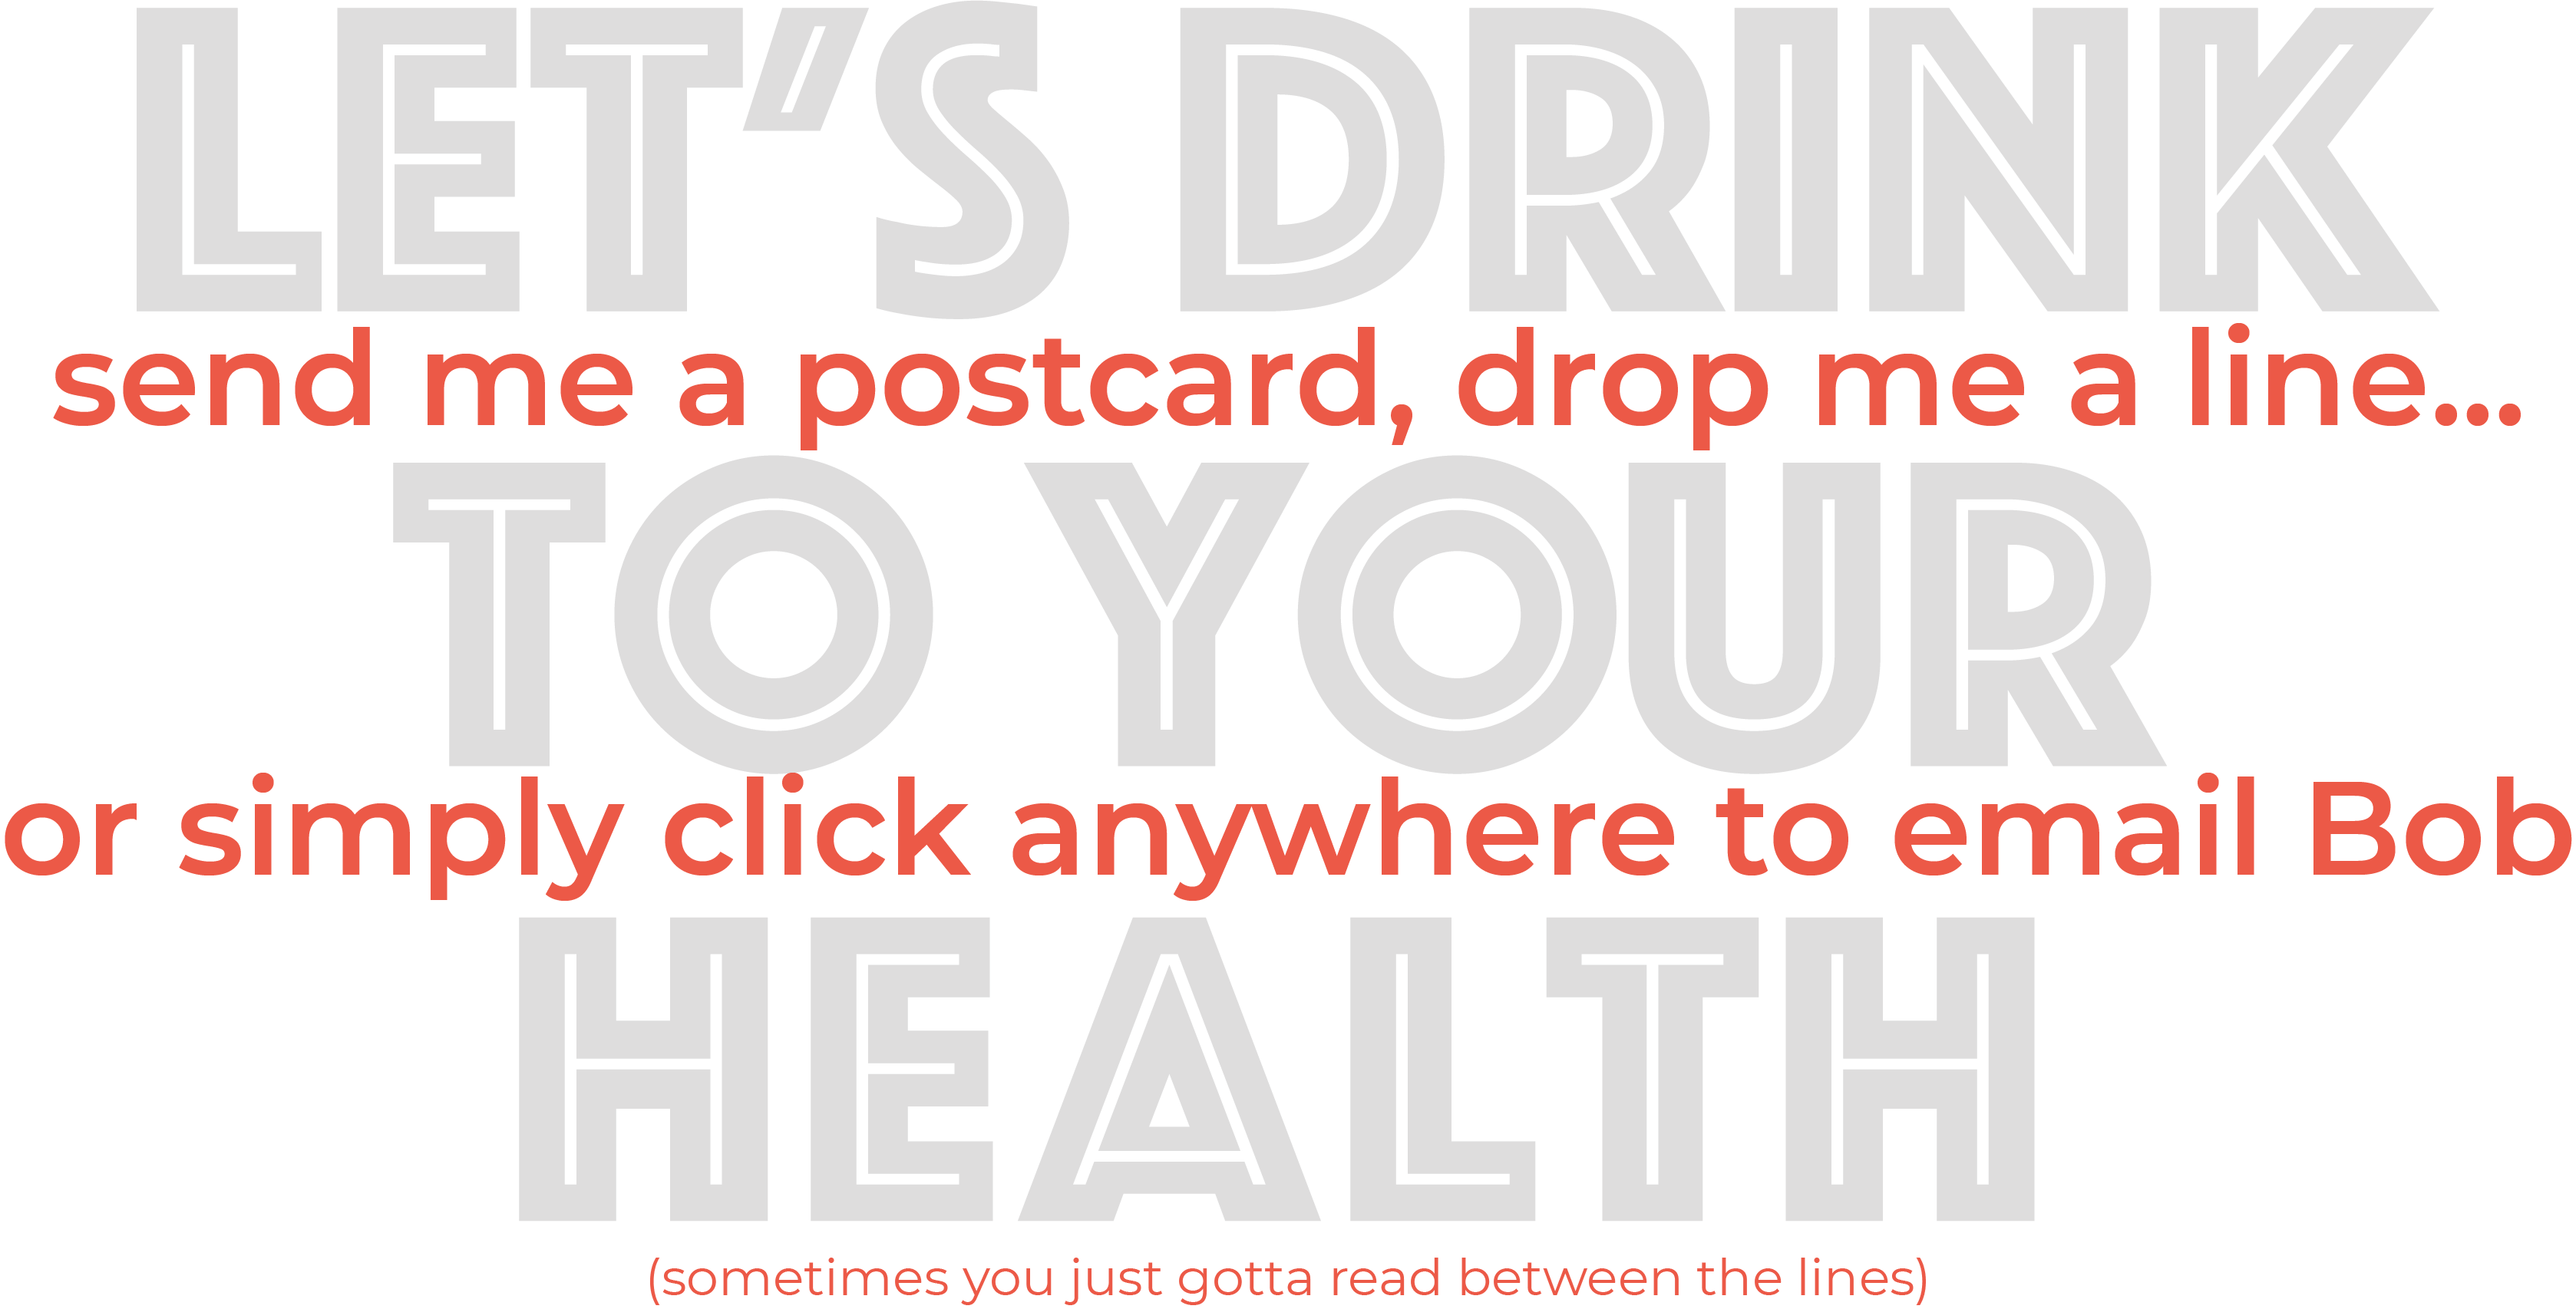 Let's drink to your health. Send me a postcard, drop me a line, or simply click anywhere to email bob